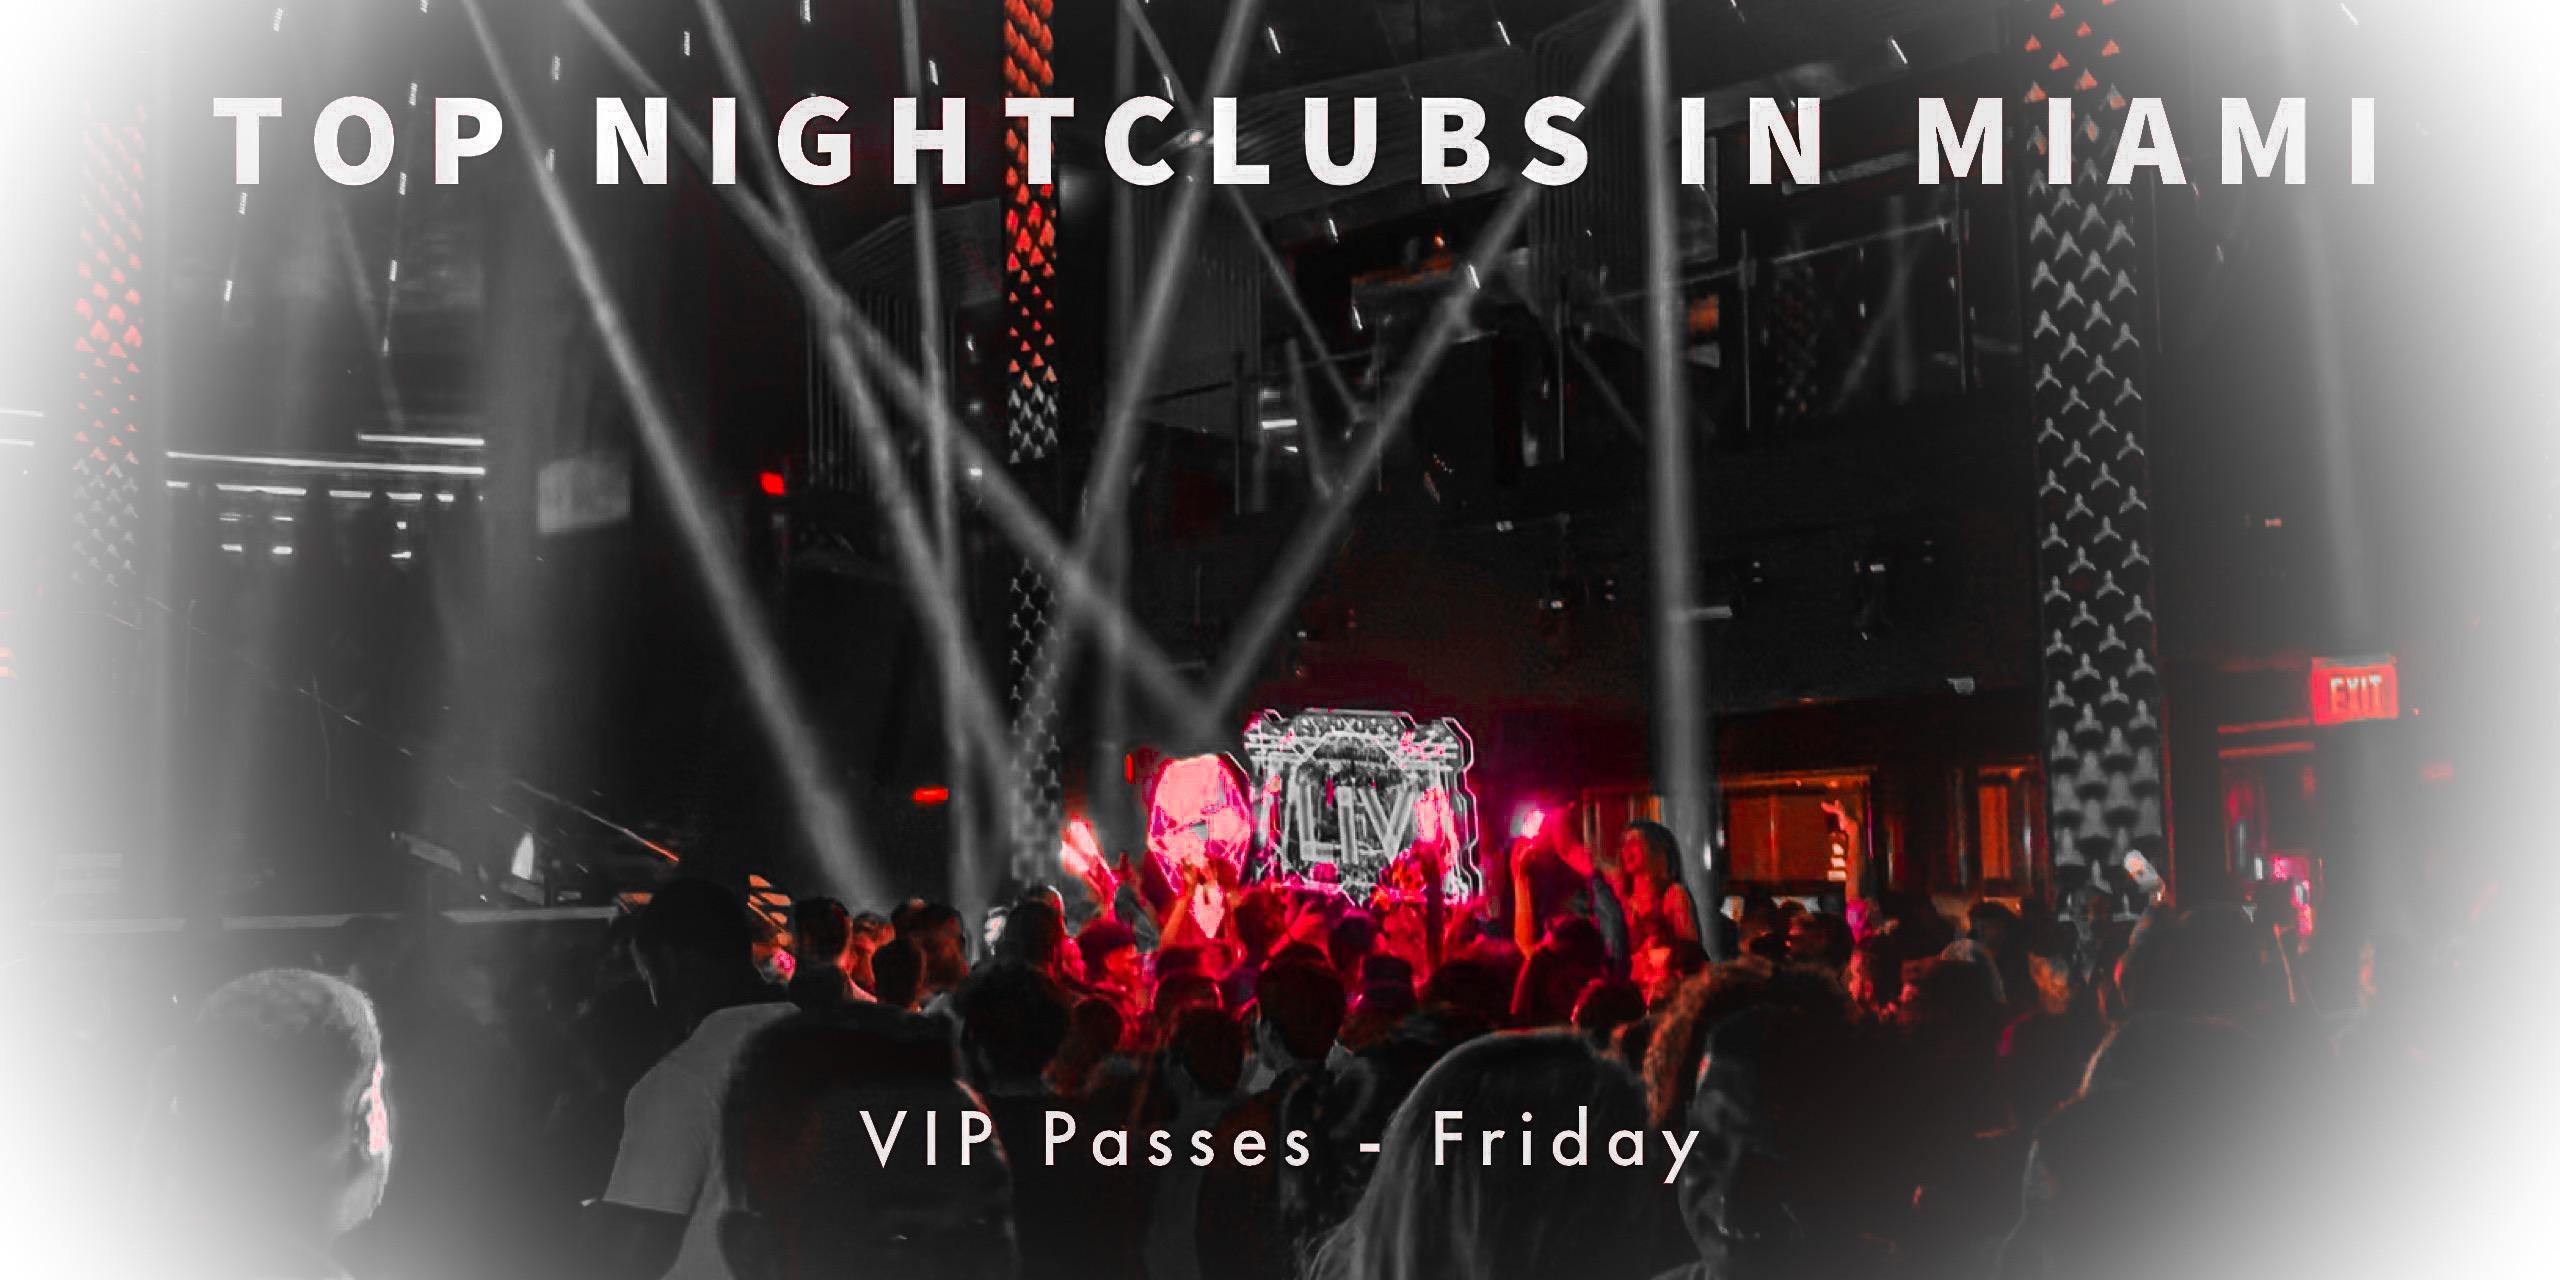 SPRING BREAK 2020 - 3 Nightlife Parties for 1 Price Deal in Miami Beach & South Beach